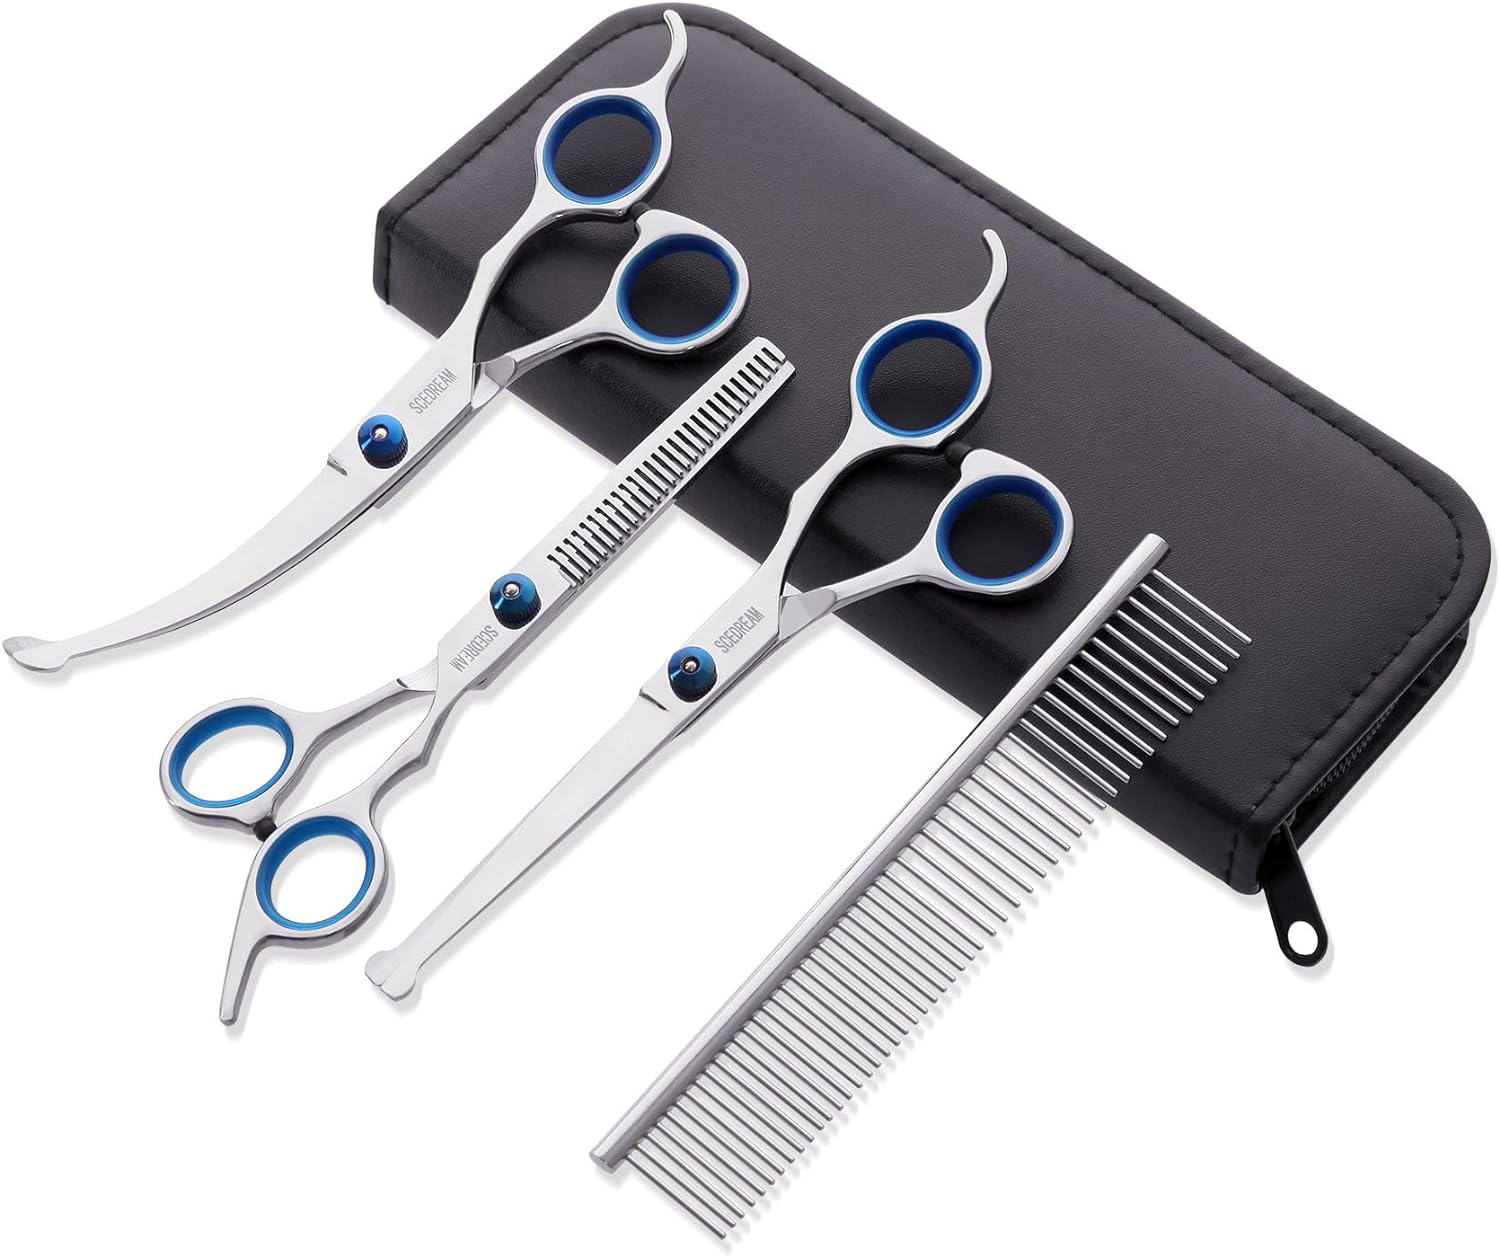 Dog Grooming Scissors Review